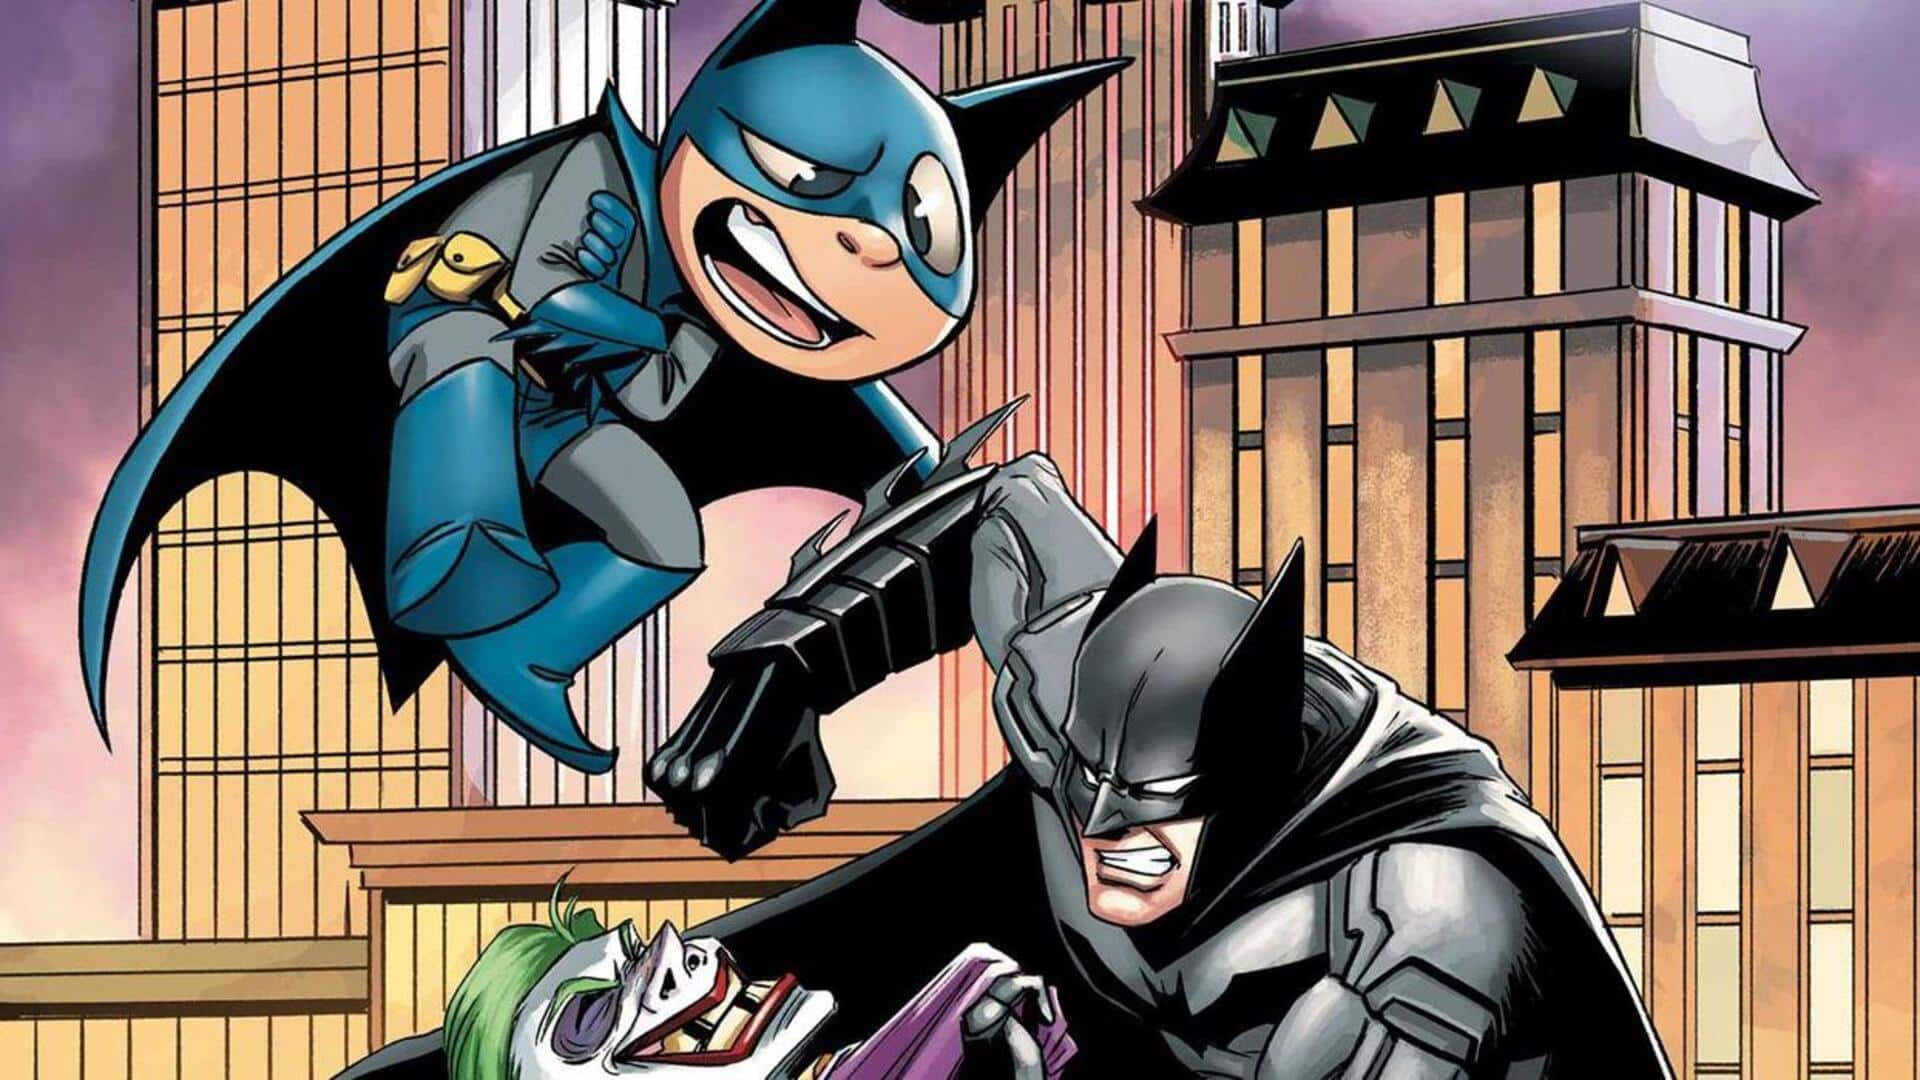 Why is Bat-Mite missing from 'Batman' comics? DC sheds light